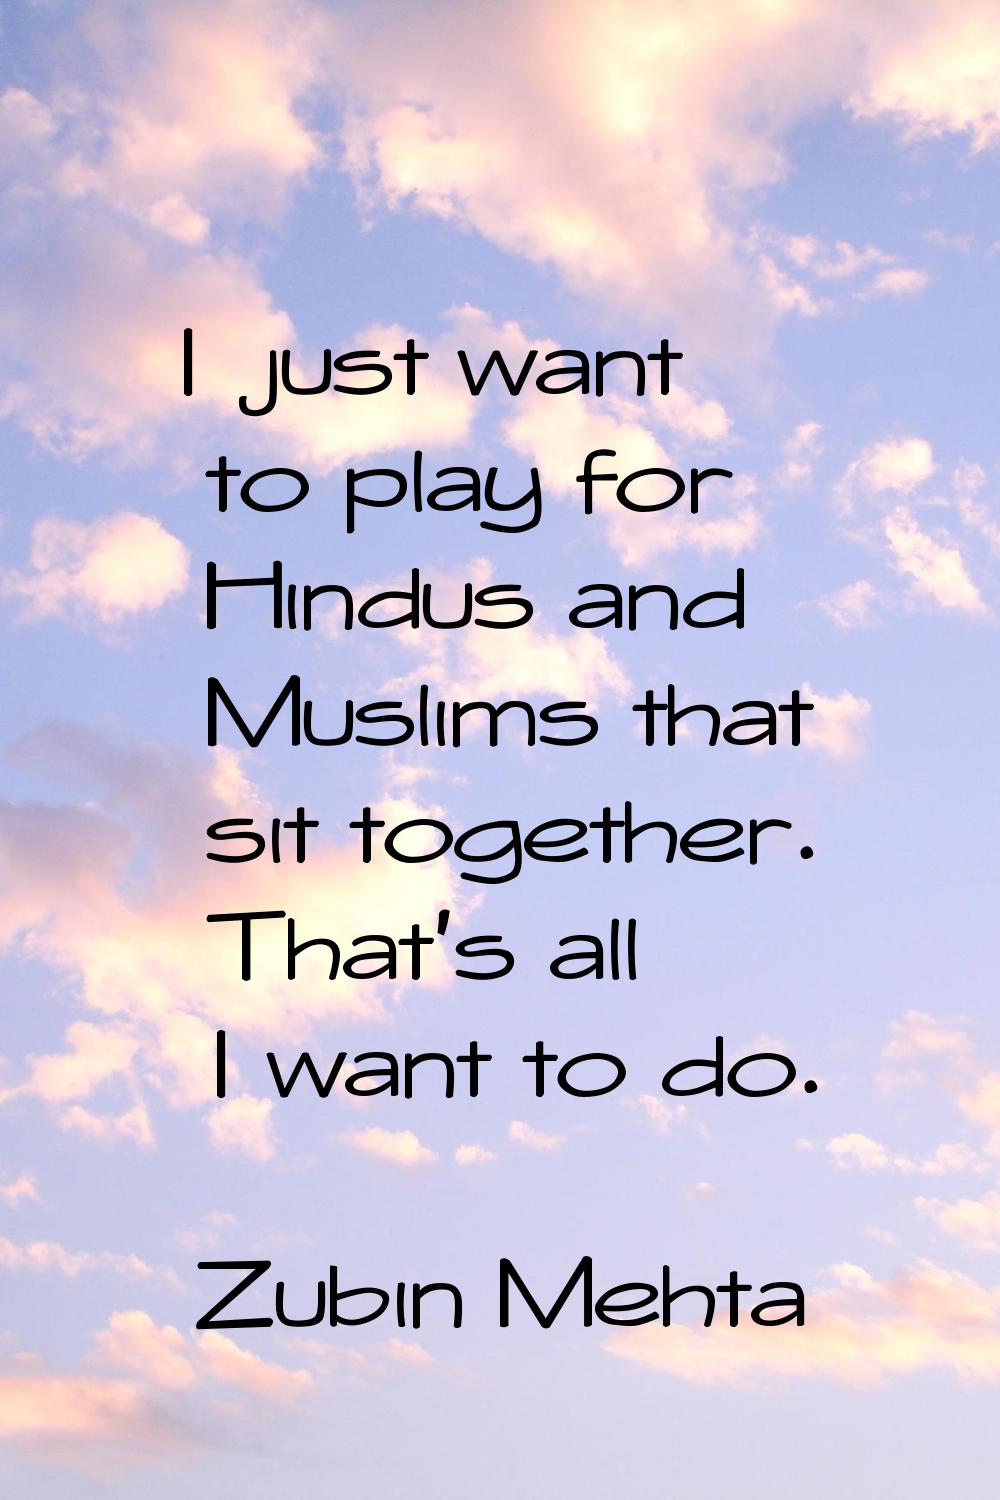 I just want to play for Hindus and Muslims that sit together. That's all I want to do.